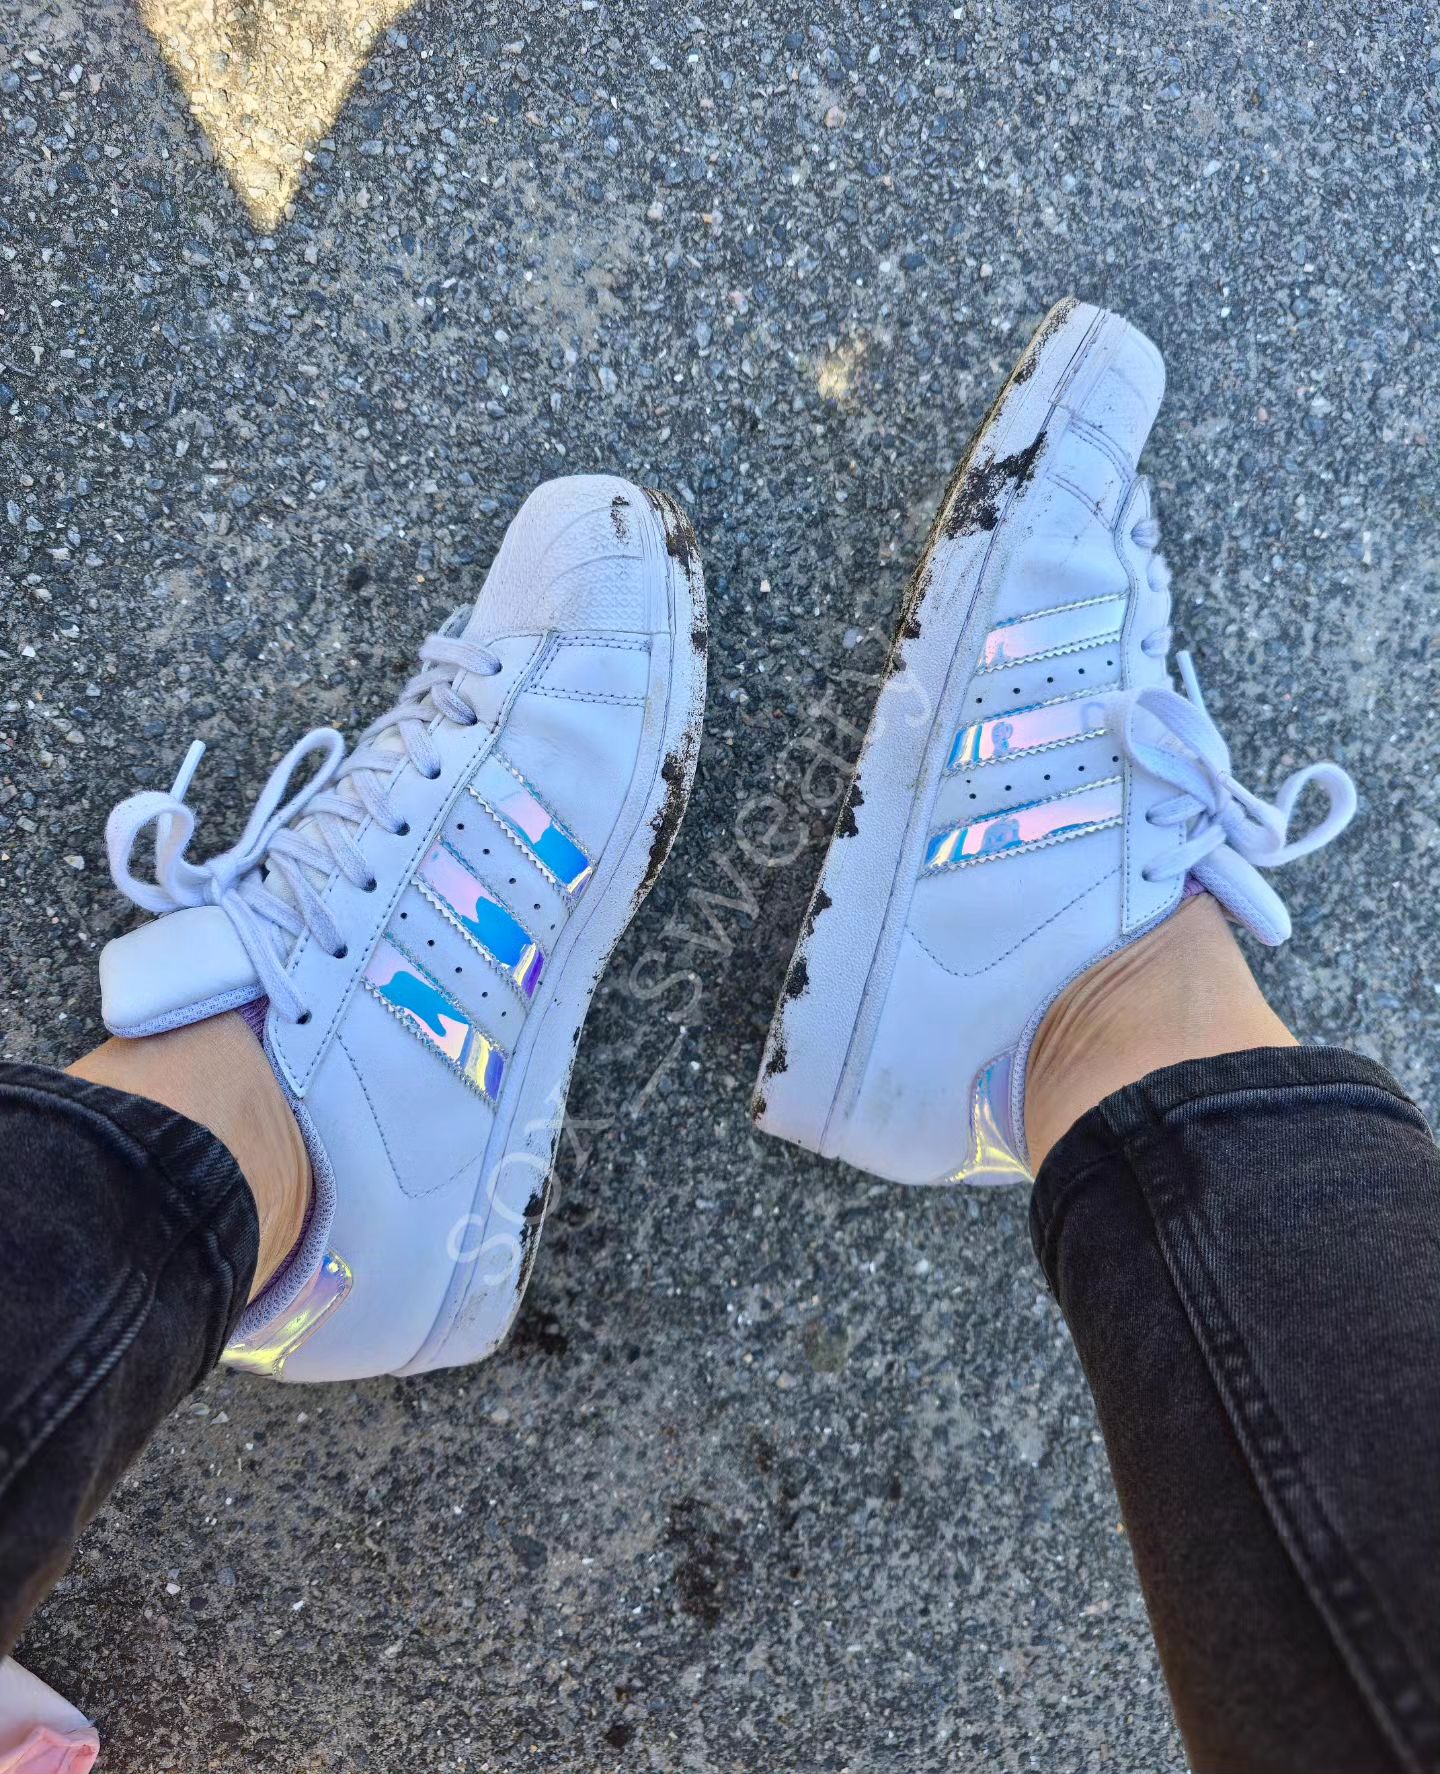 Sneaky Shoes 🥰🥰

#holographic #adidassneaker #dreckig #matschigeschuhe #schuhe #shoes #dirtyshoes #whitesneakers #bank #nordsee #blondehair #anklejeans